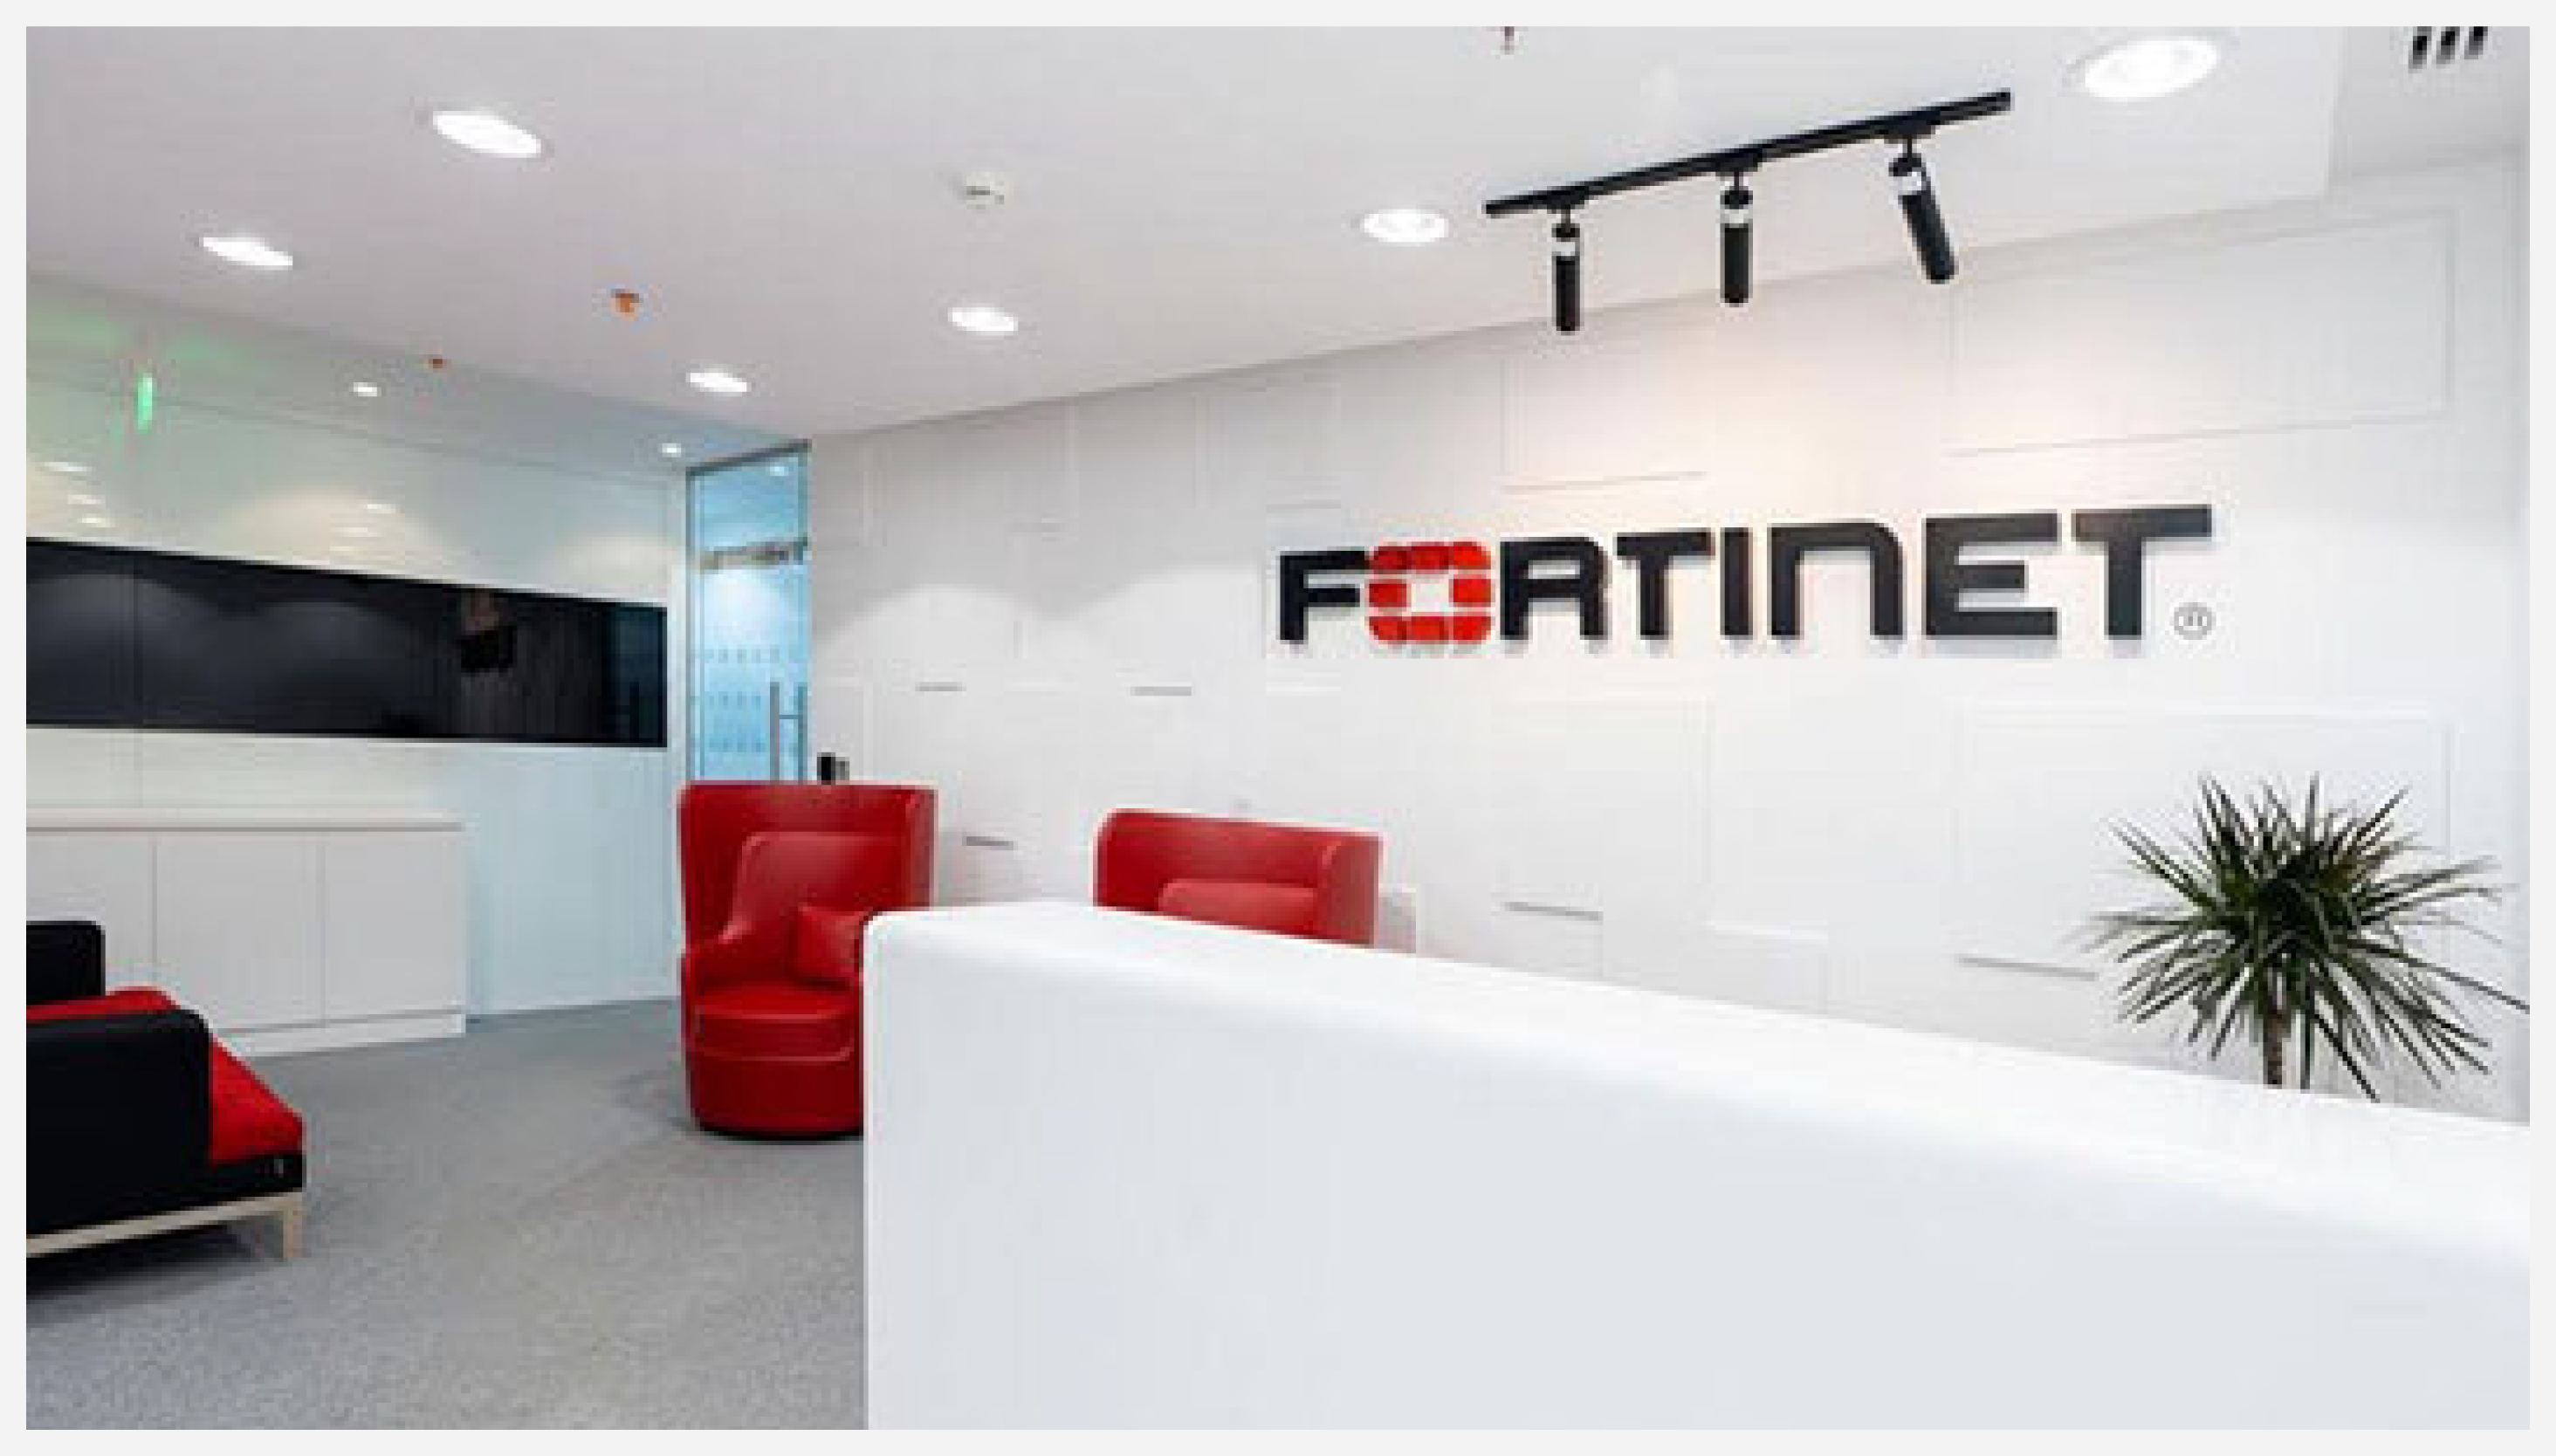 Photograph of the Fortinet office